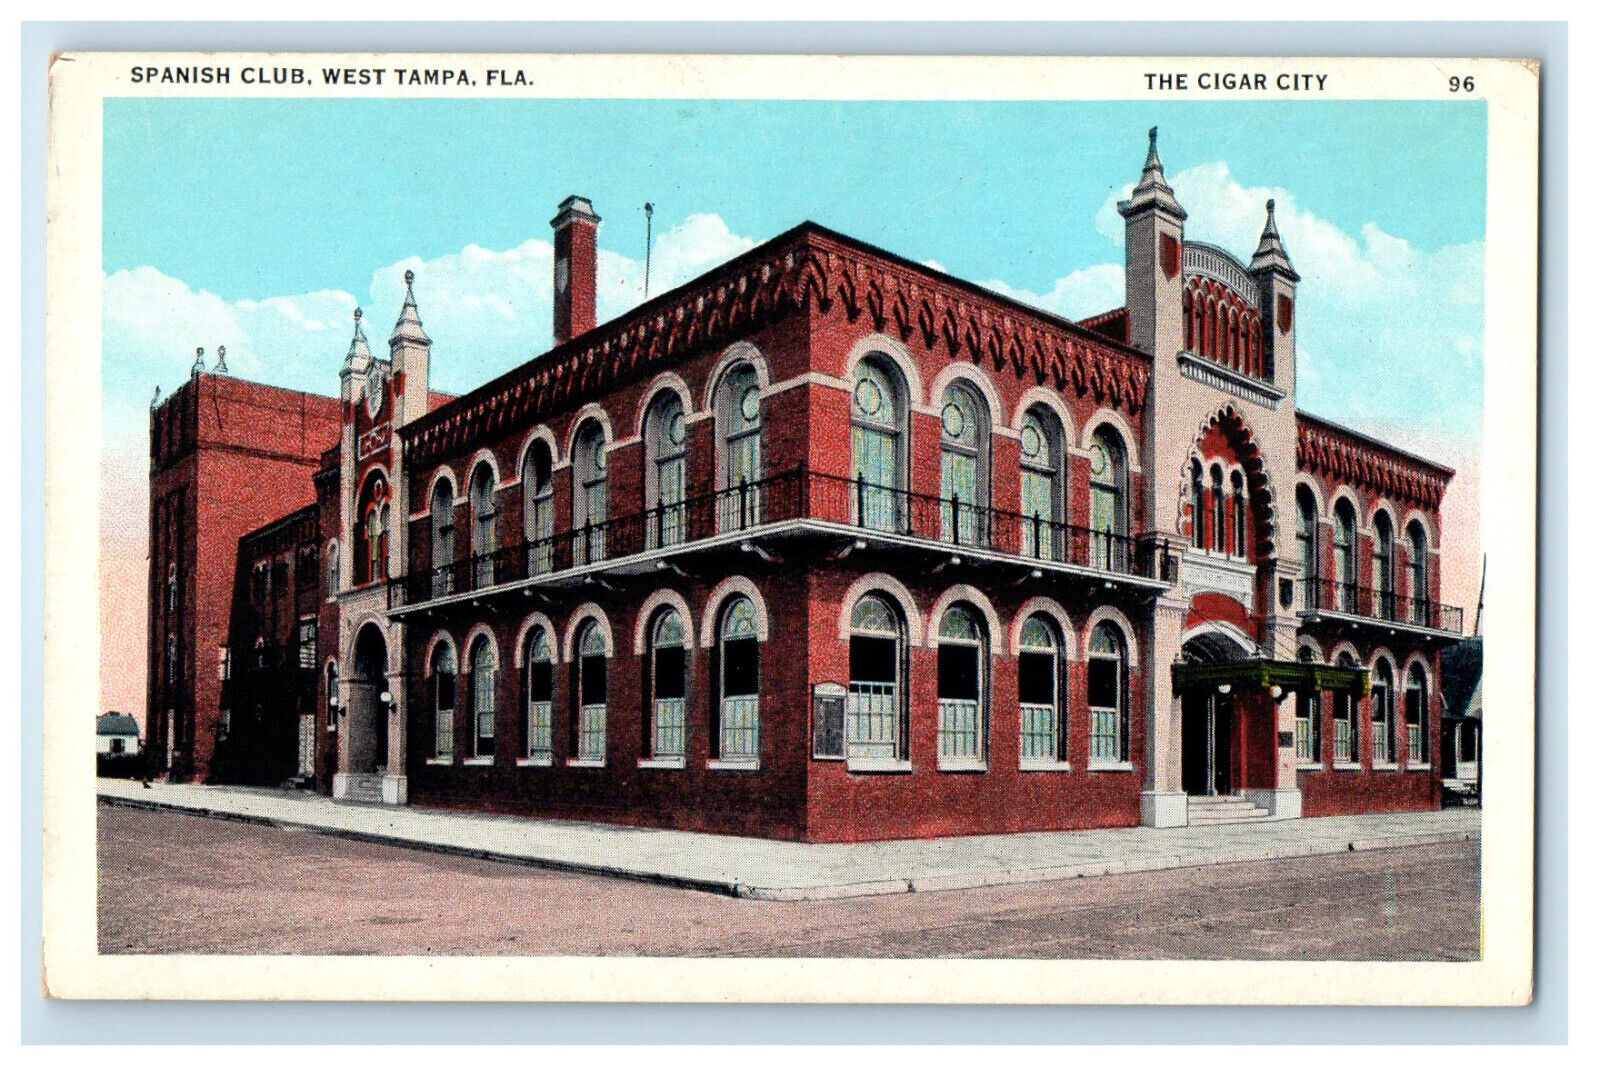 c1920s The Cigar City, Spanish Club, West Tampa Florida FL Unposted Postcard